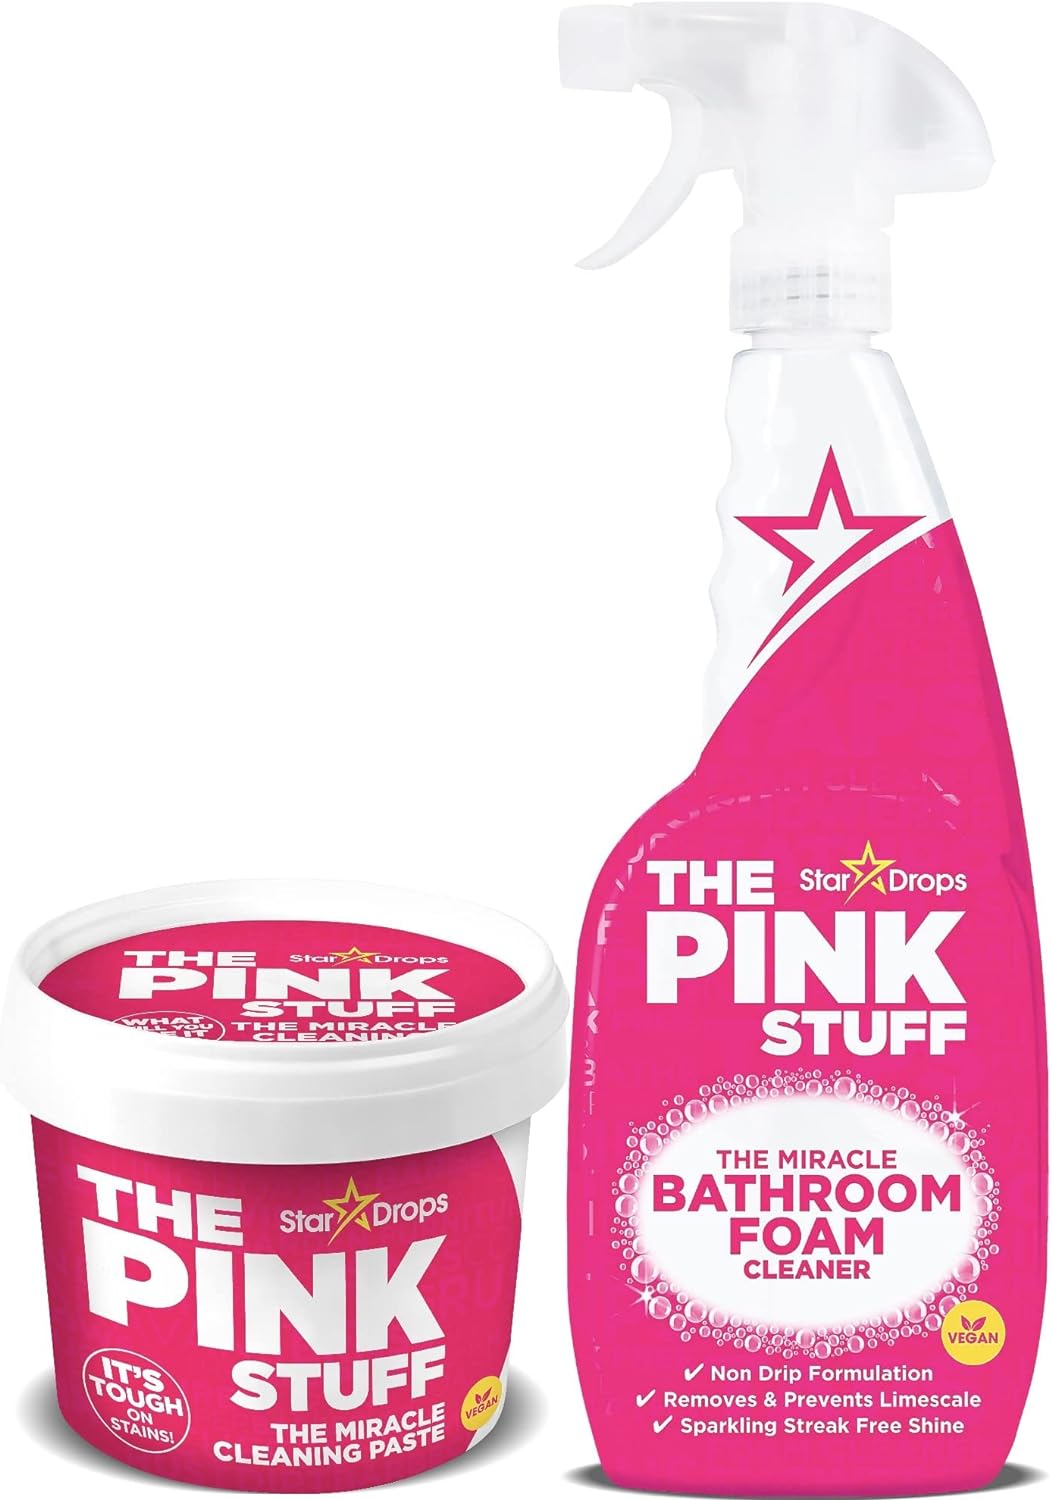 Stardrops - The Pink Stuff - The Miracle Cleaning Paste and Bathroom Foam Cleaner Bundle (1 Cleaning Paste, 1 Bathroom Foam Cleaner)